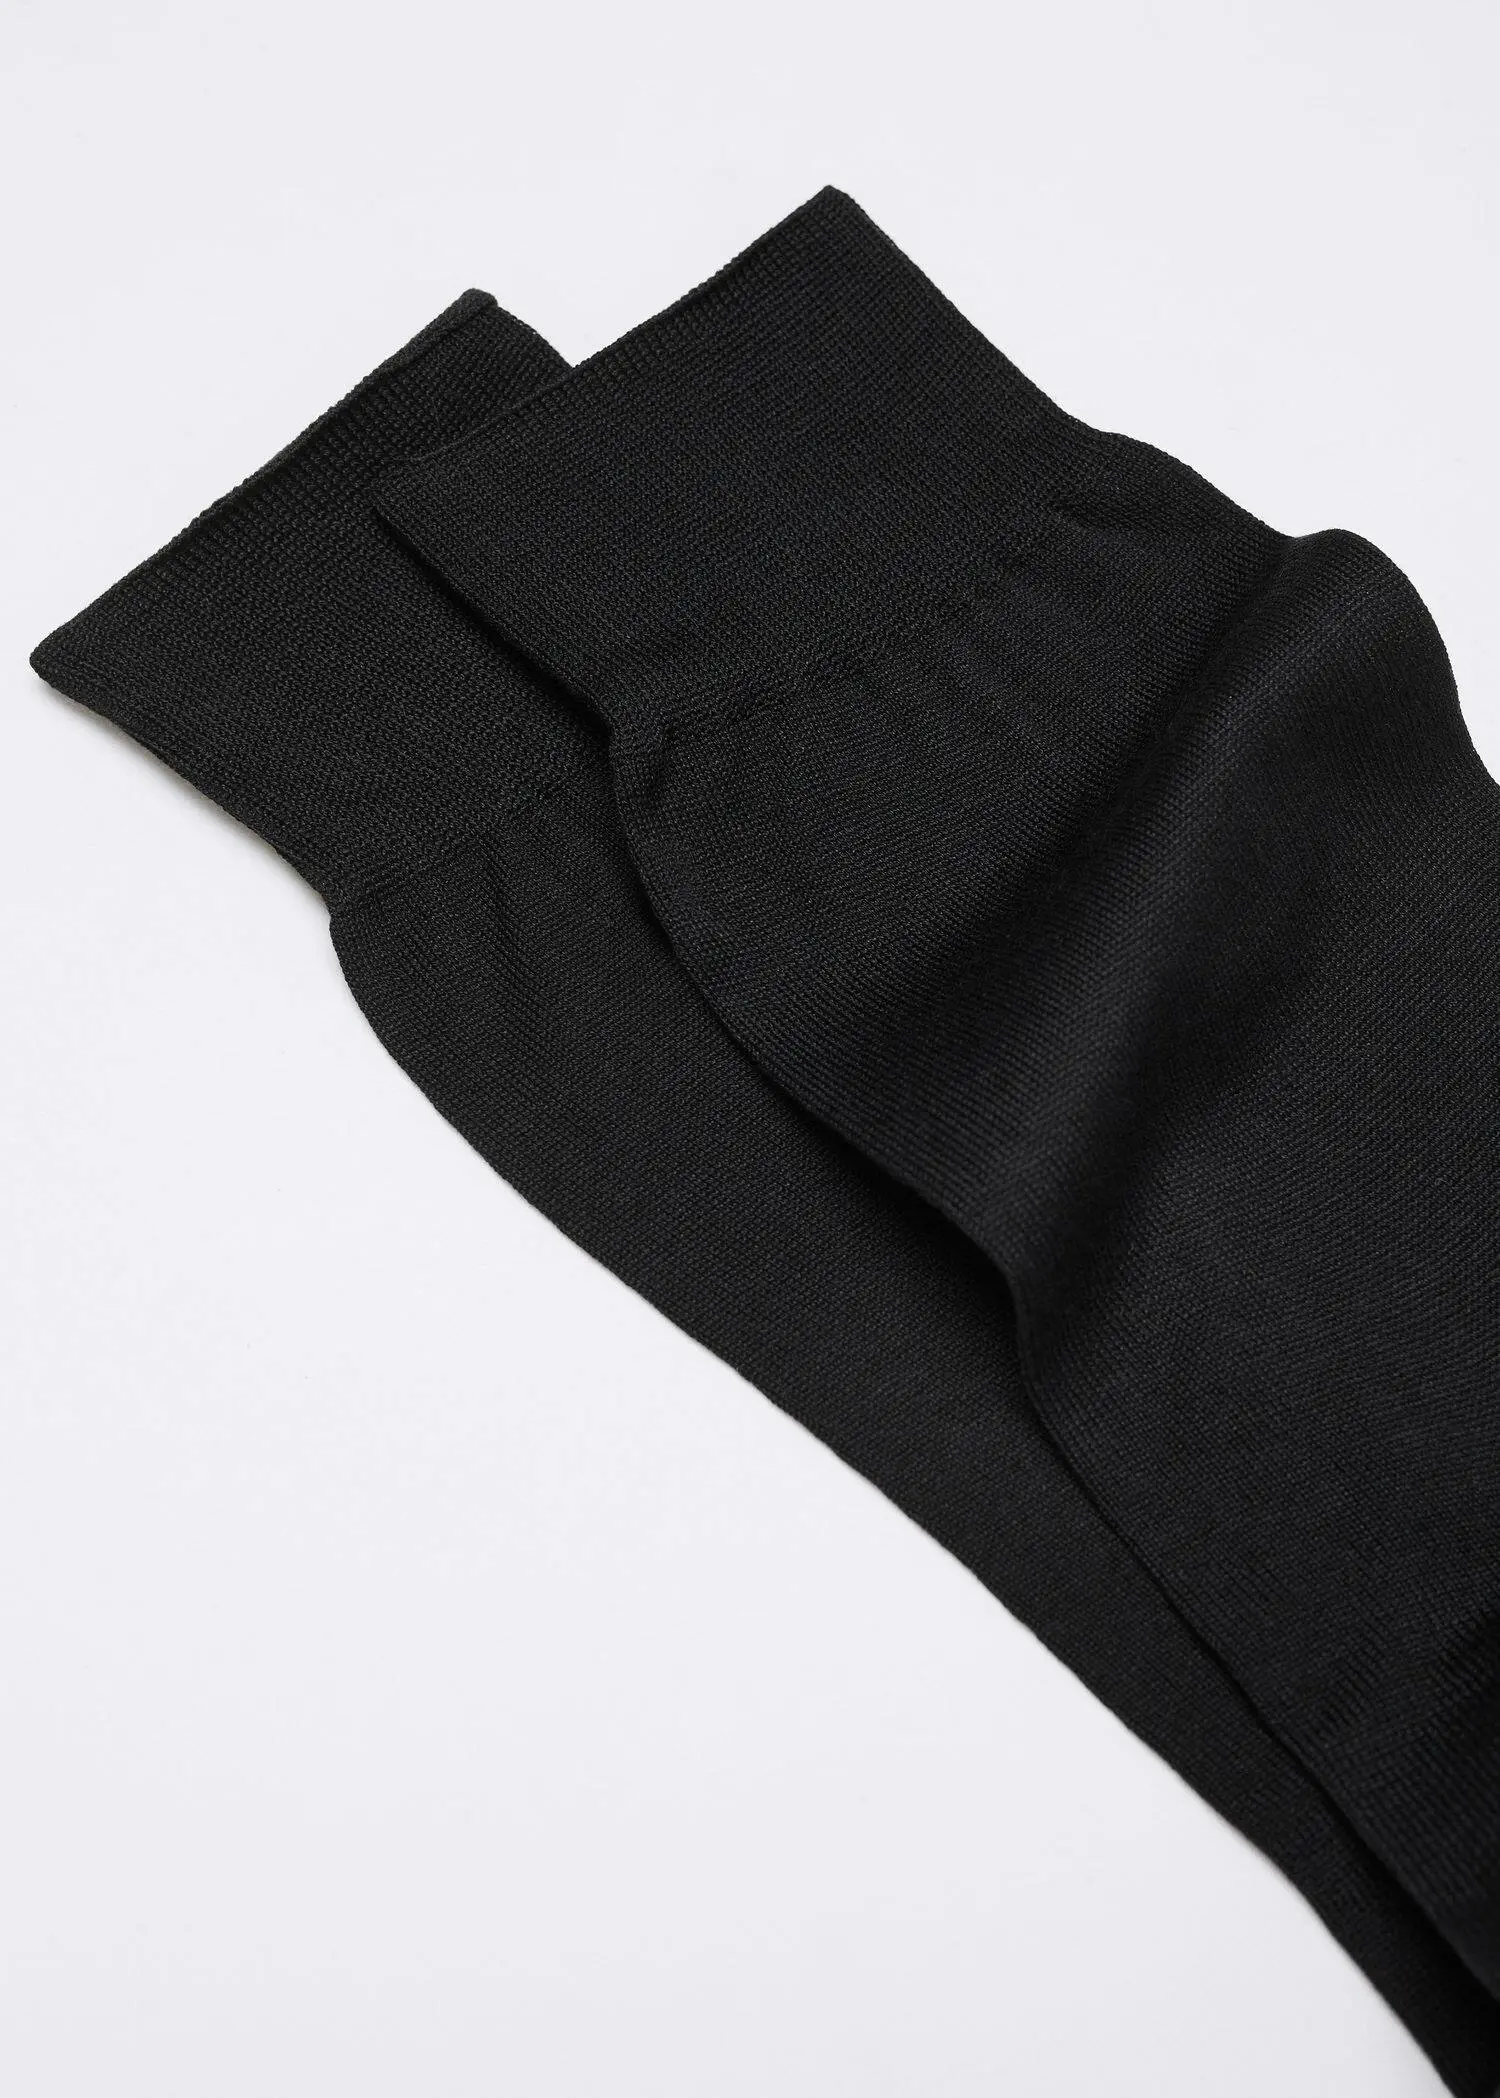 Mango 100% plain cotton socks. a pair of black socks laying on top of a white surface. 